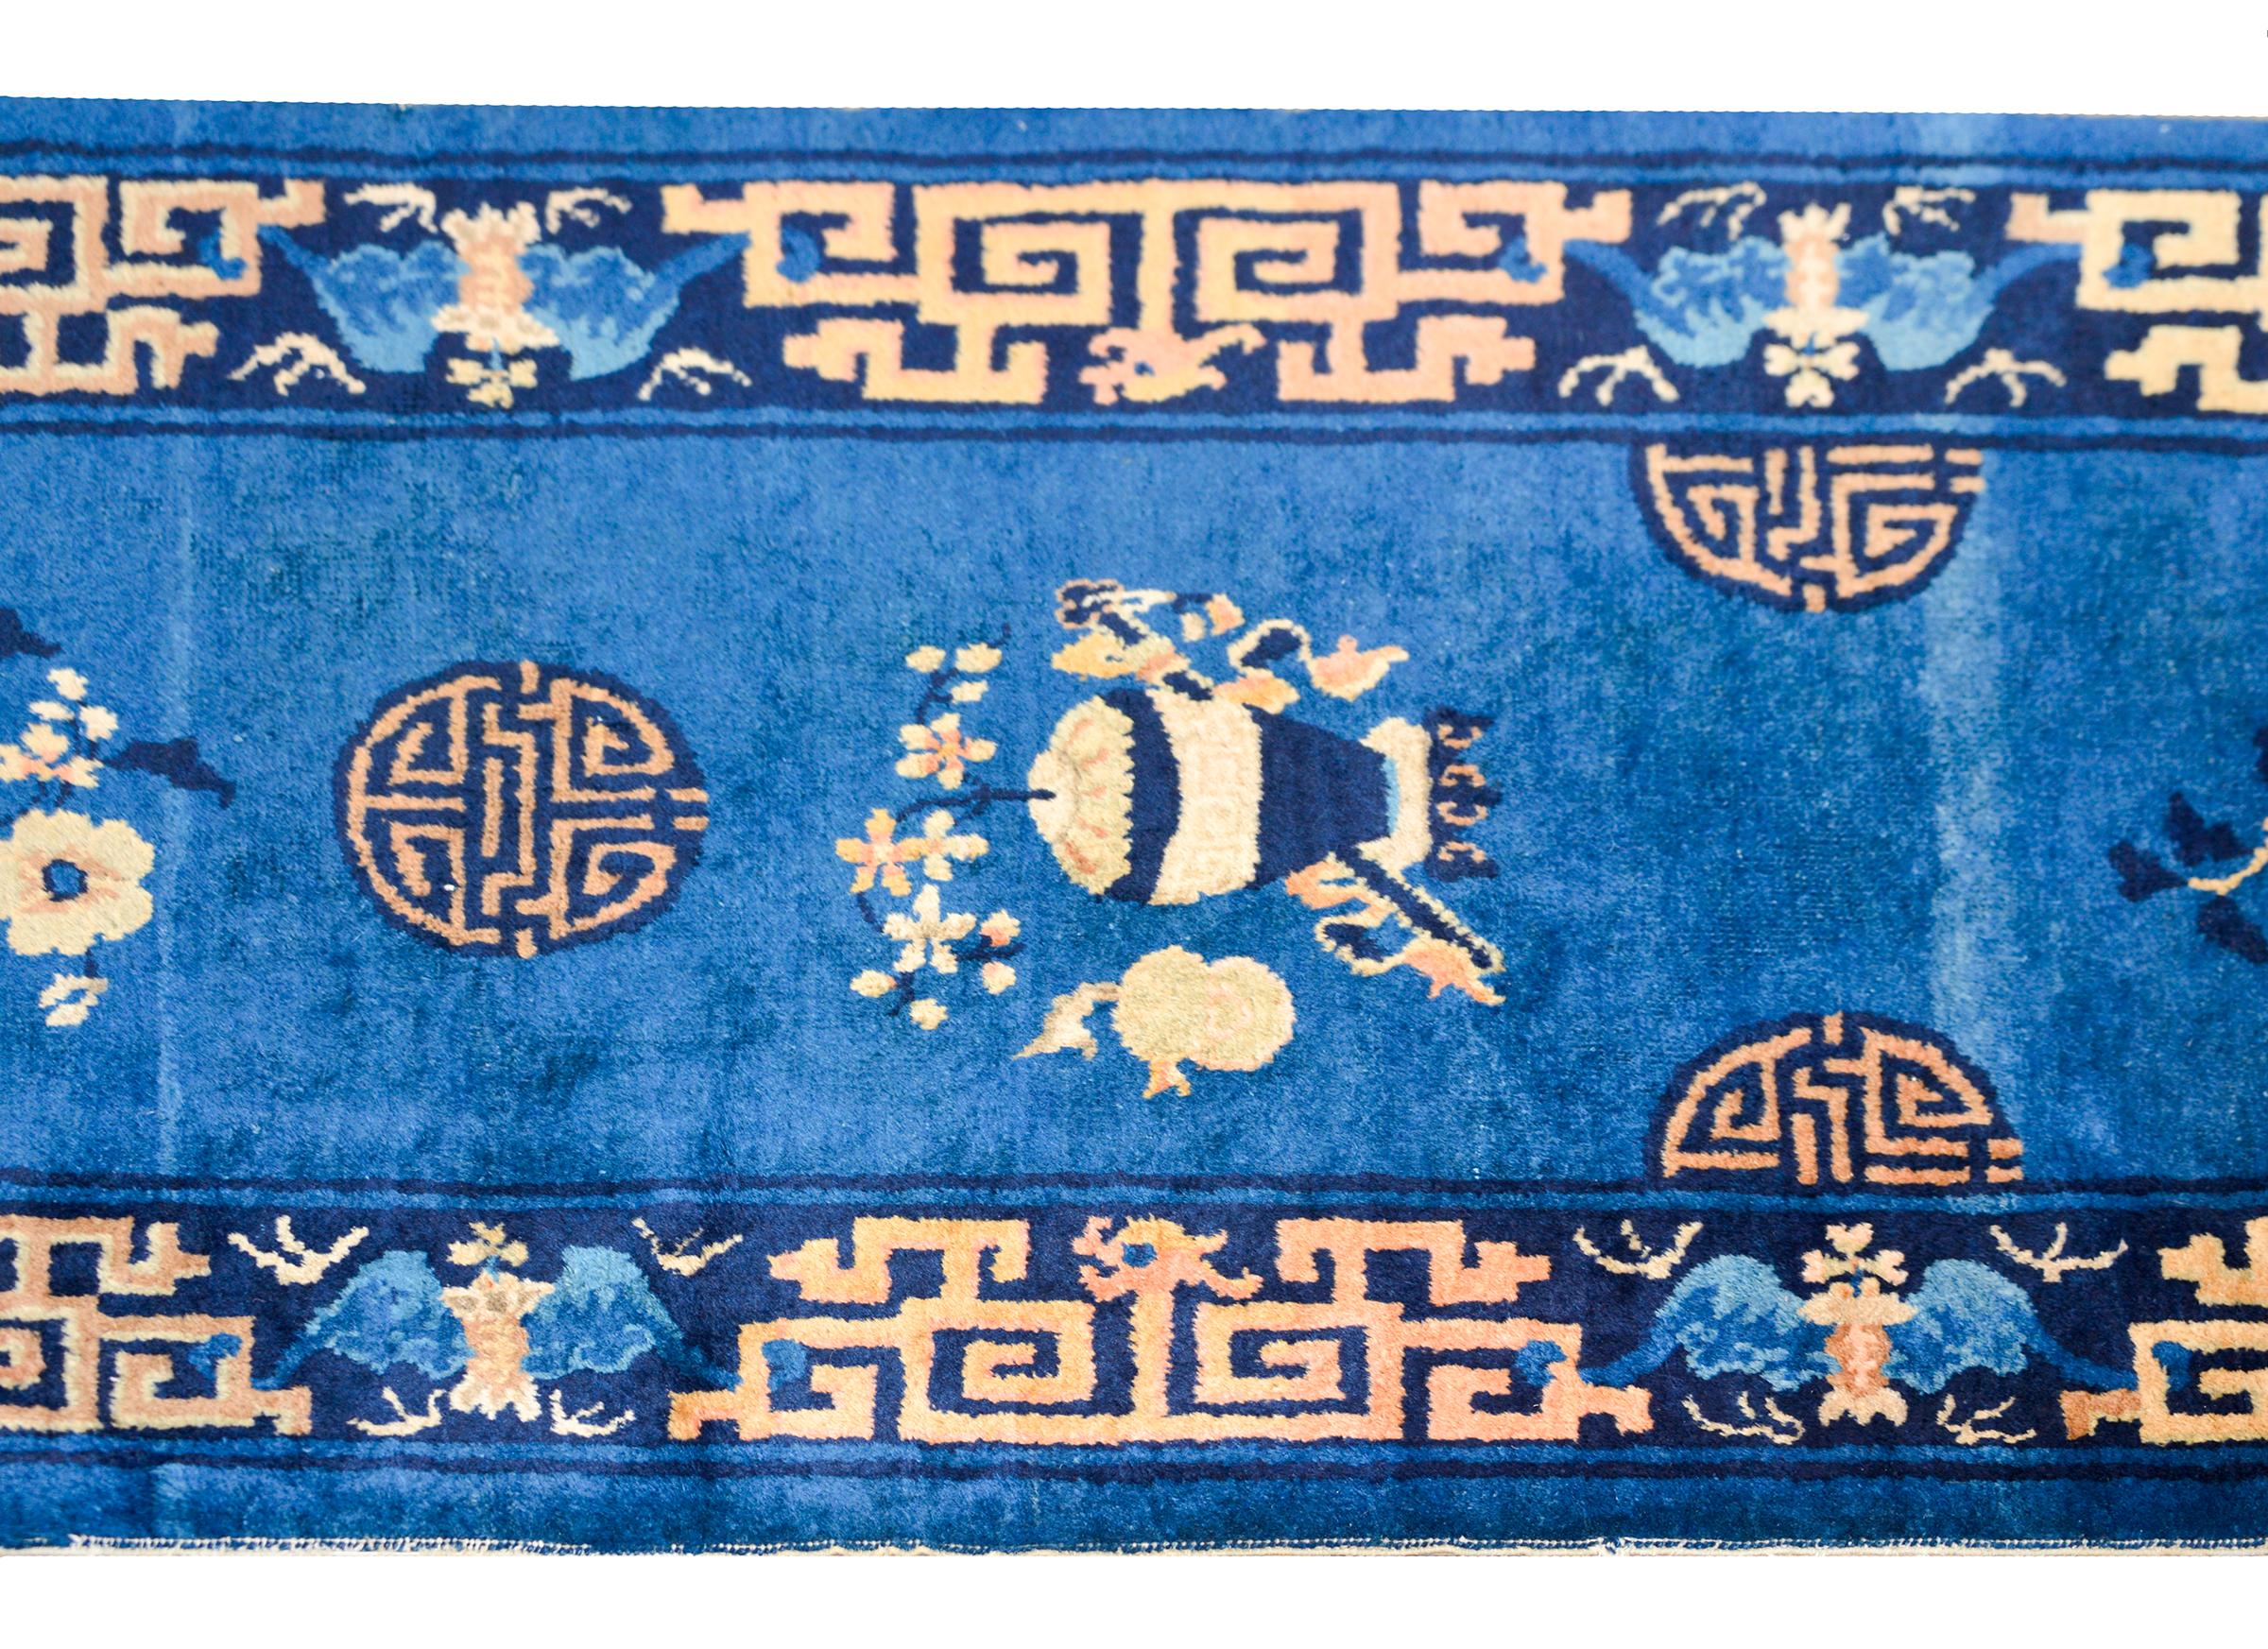 A wonderful early 20th century Chinese Art Deco runner with alternating auspicious floral and Shou character medallions set against an indigo background, and surrounded by a beautiful bold border with bats and scrolling dragons. In China, the Shou